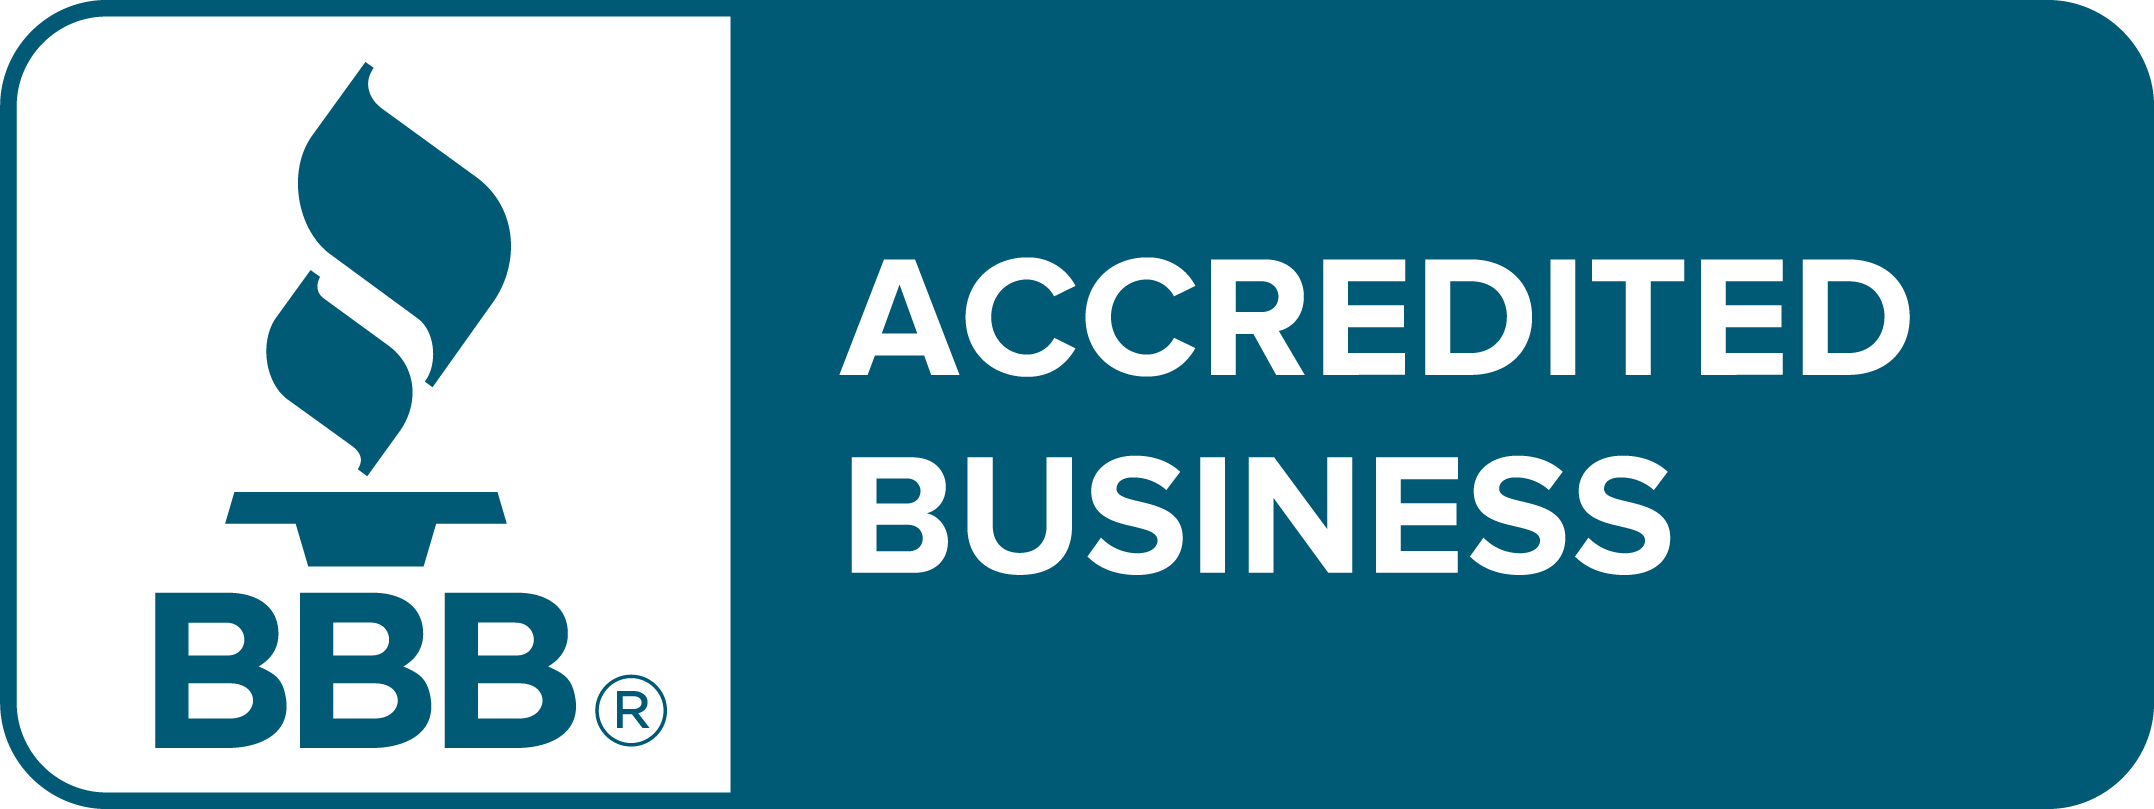 BBB-Accredited-Business (1)